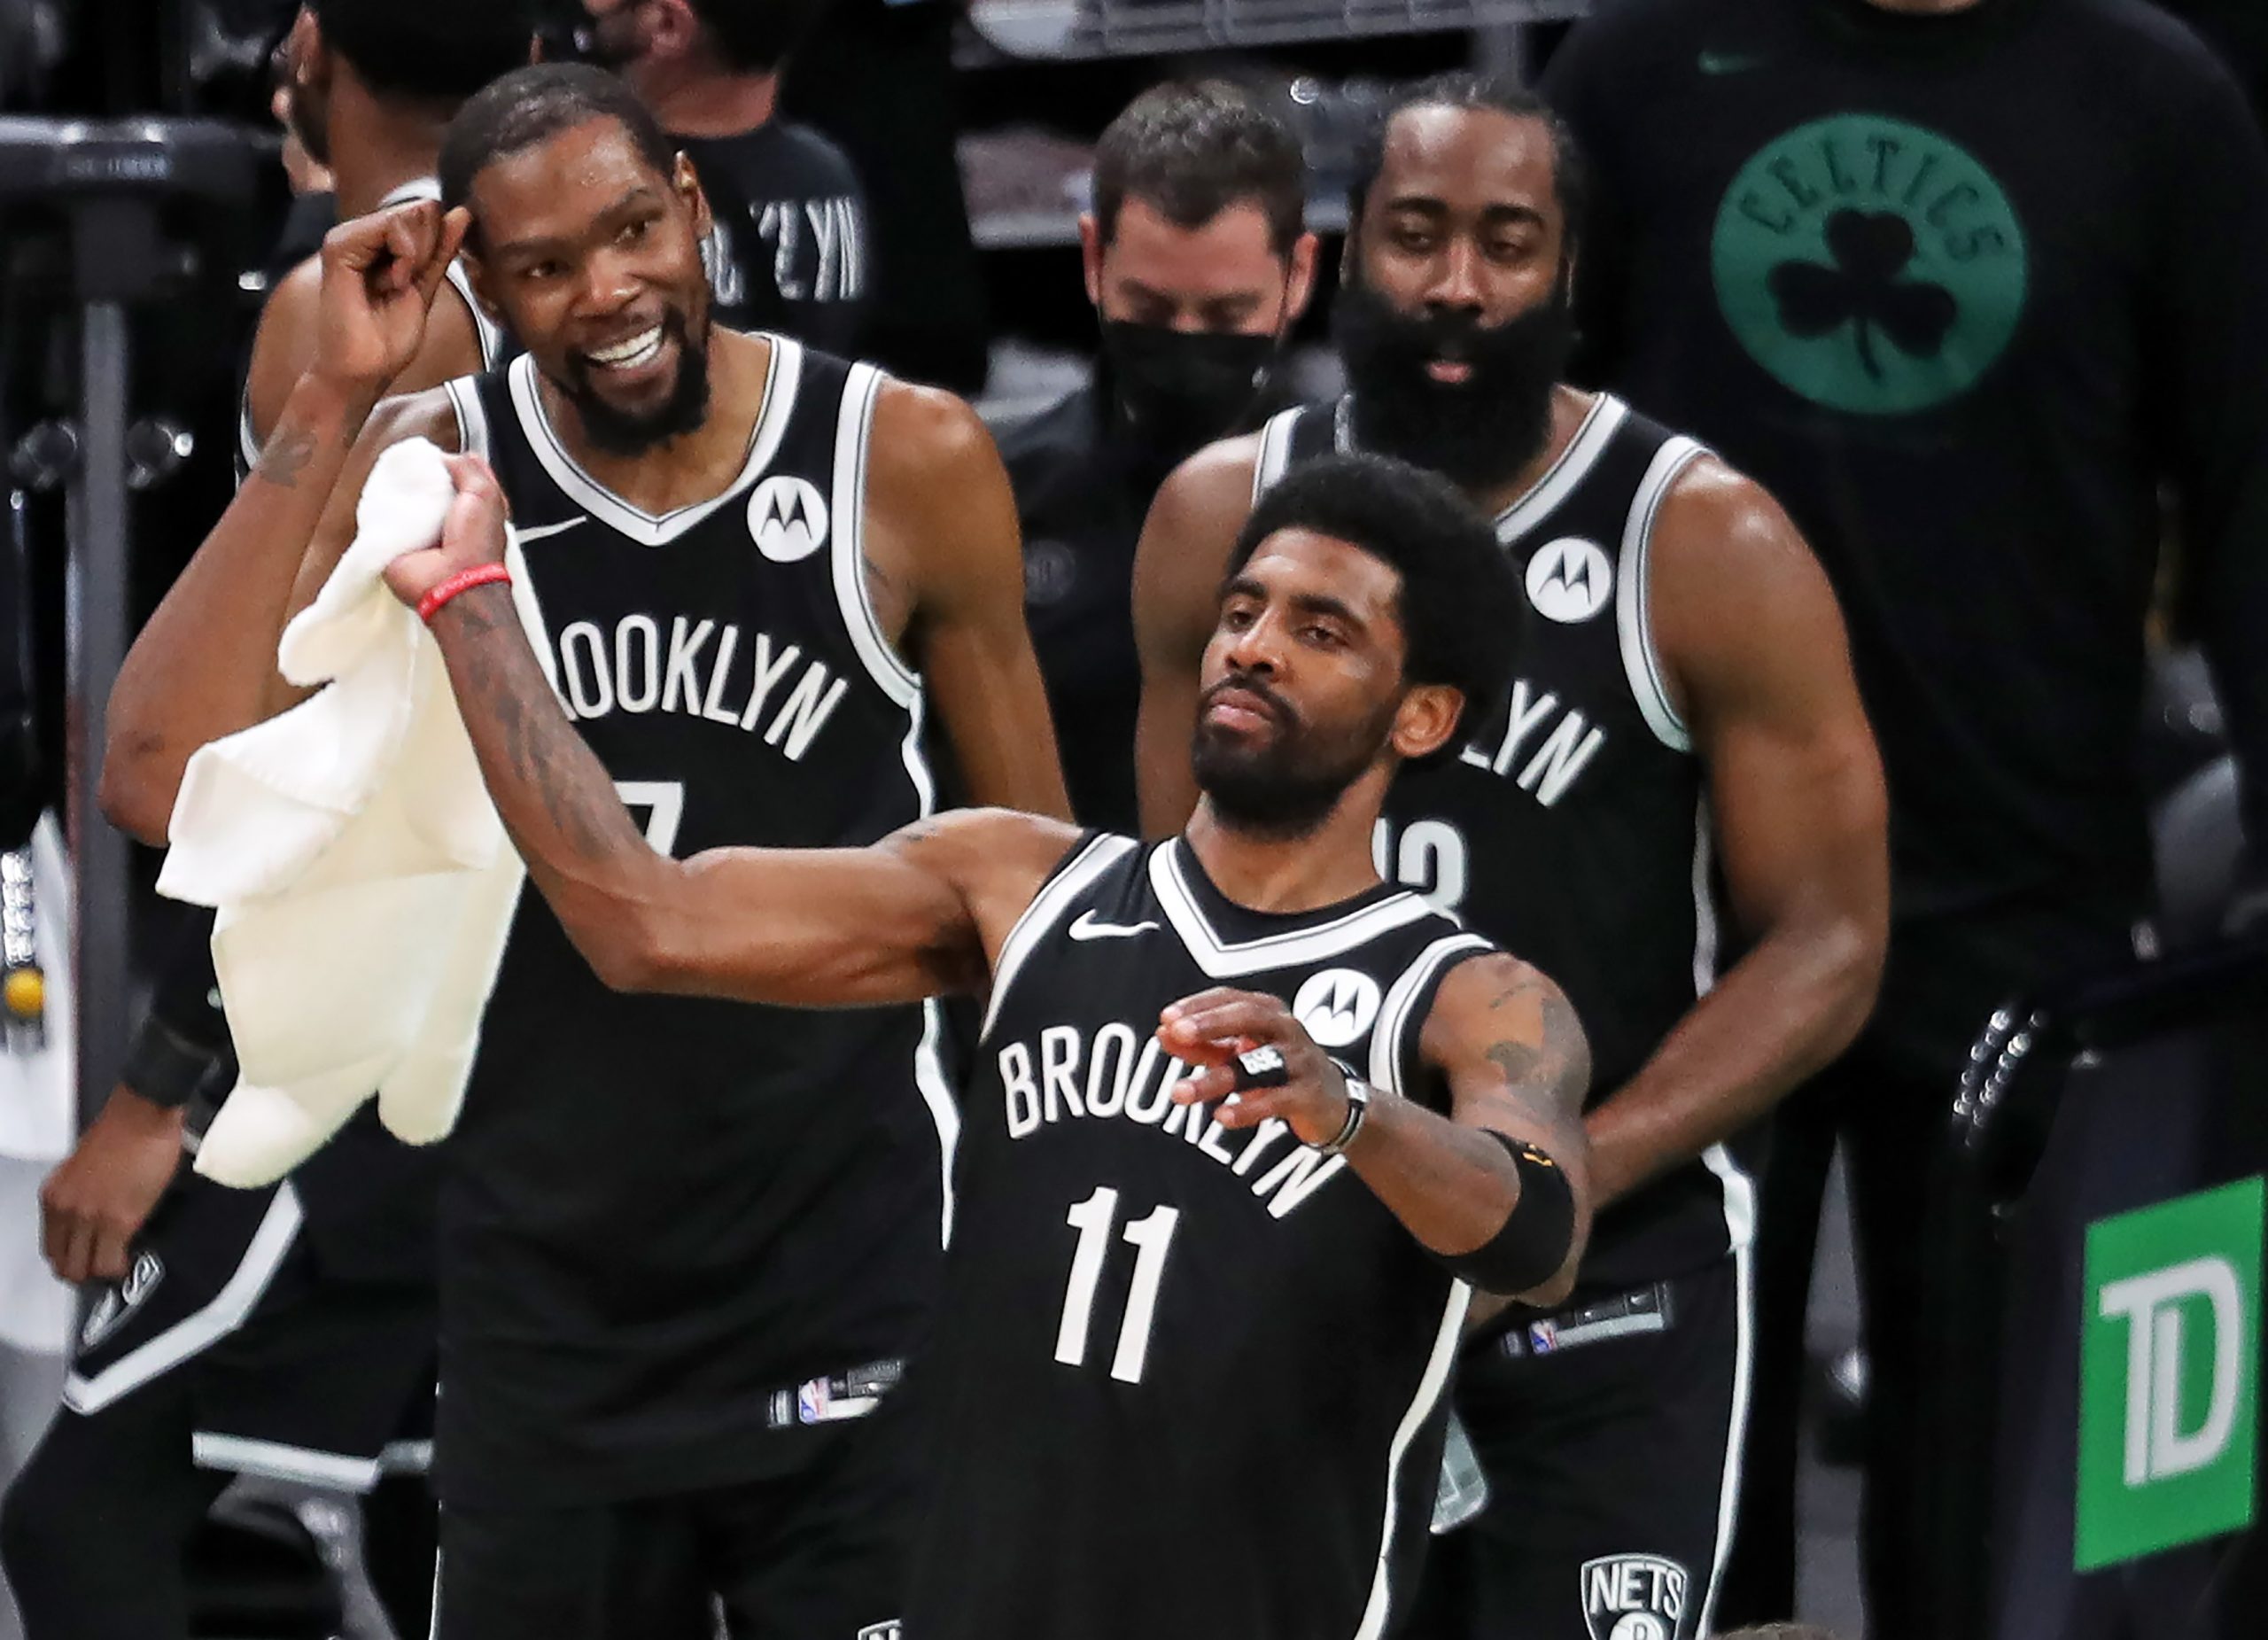 Brooklyn Nets star guard Kyrie Irving waves a towel in celebration alongside teammates Kevin Durant and James Harden during a game at Boston's TD Garden on May 30, 2021.